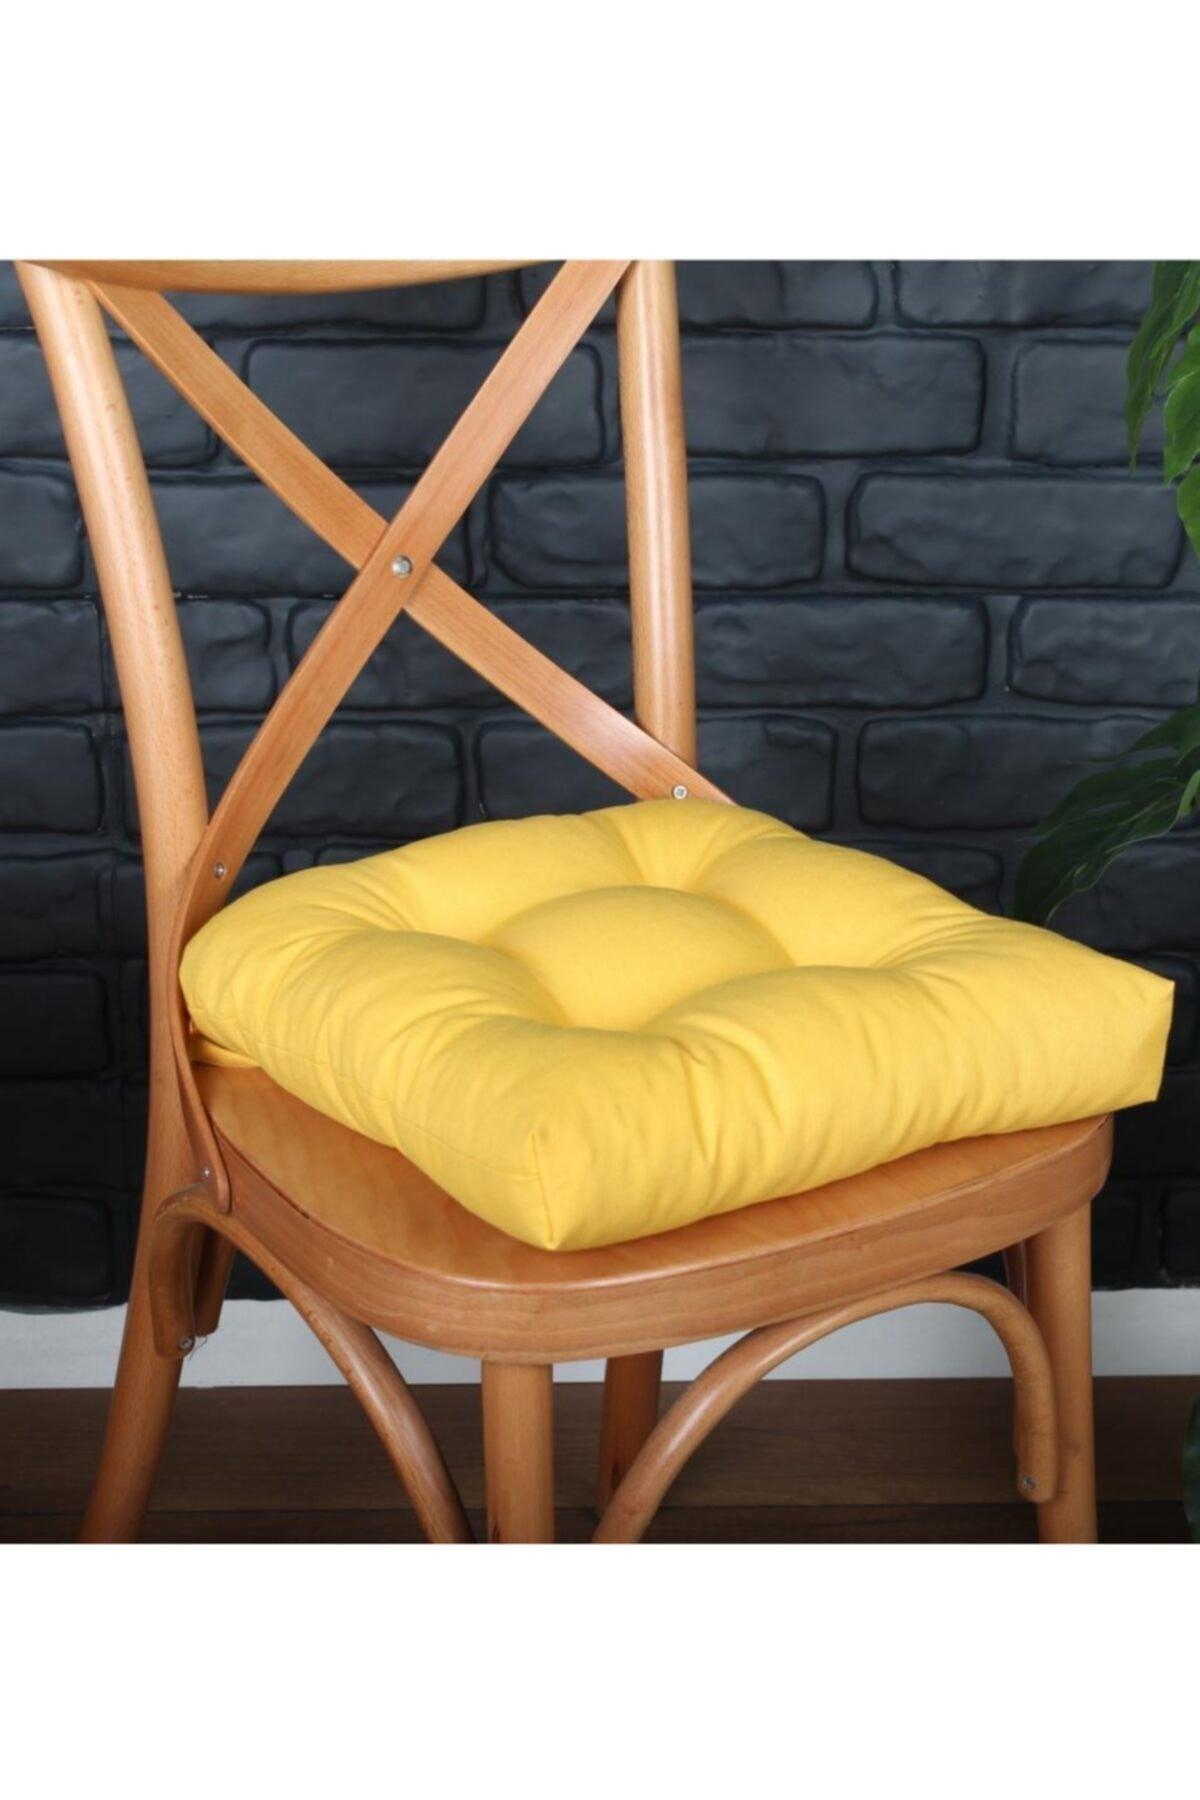 Lux Pofidik Yellow Chair Cushion Specially Stitched Laced 40x40cm - Swordslife